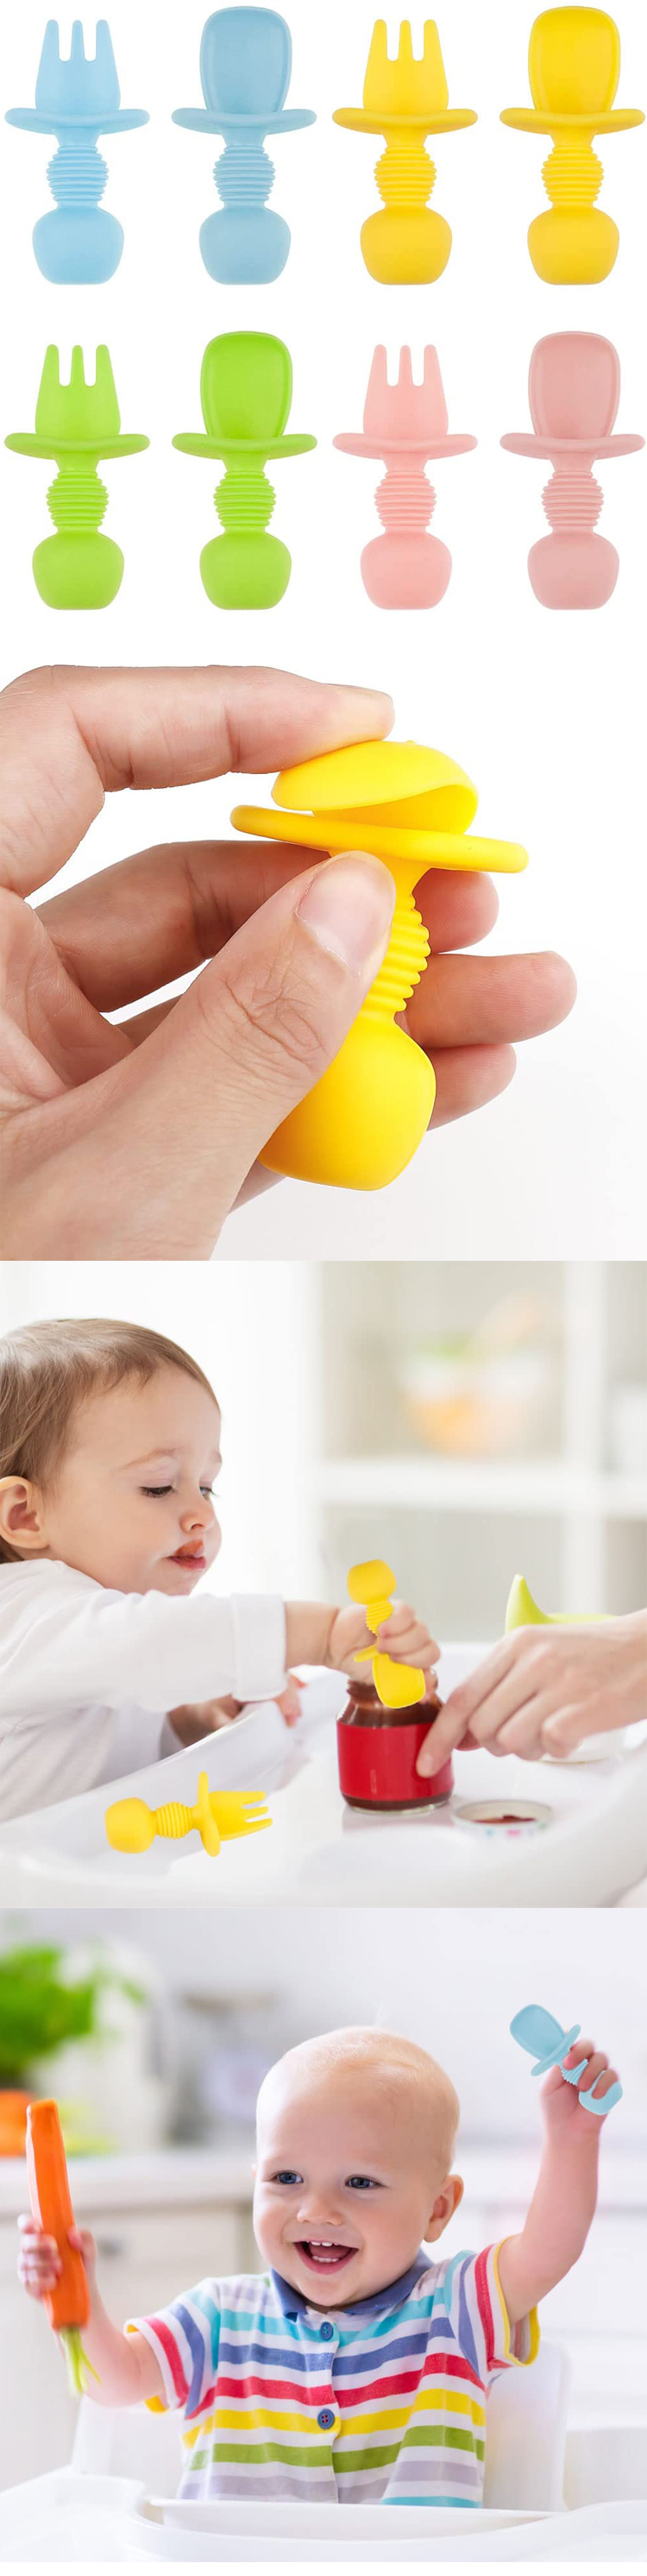 [2 sets]Wellbest Silicone baby weaning appliance